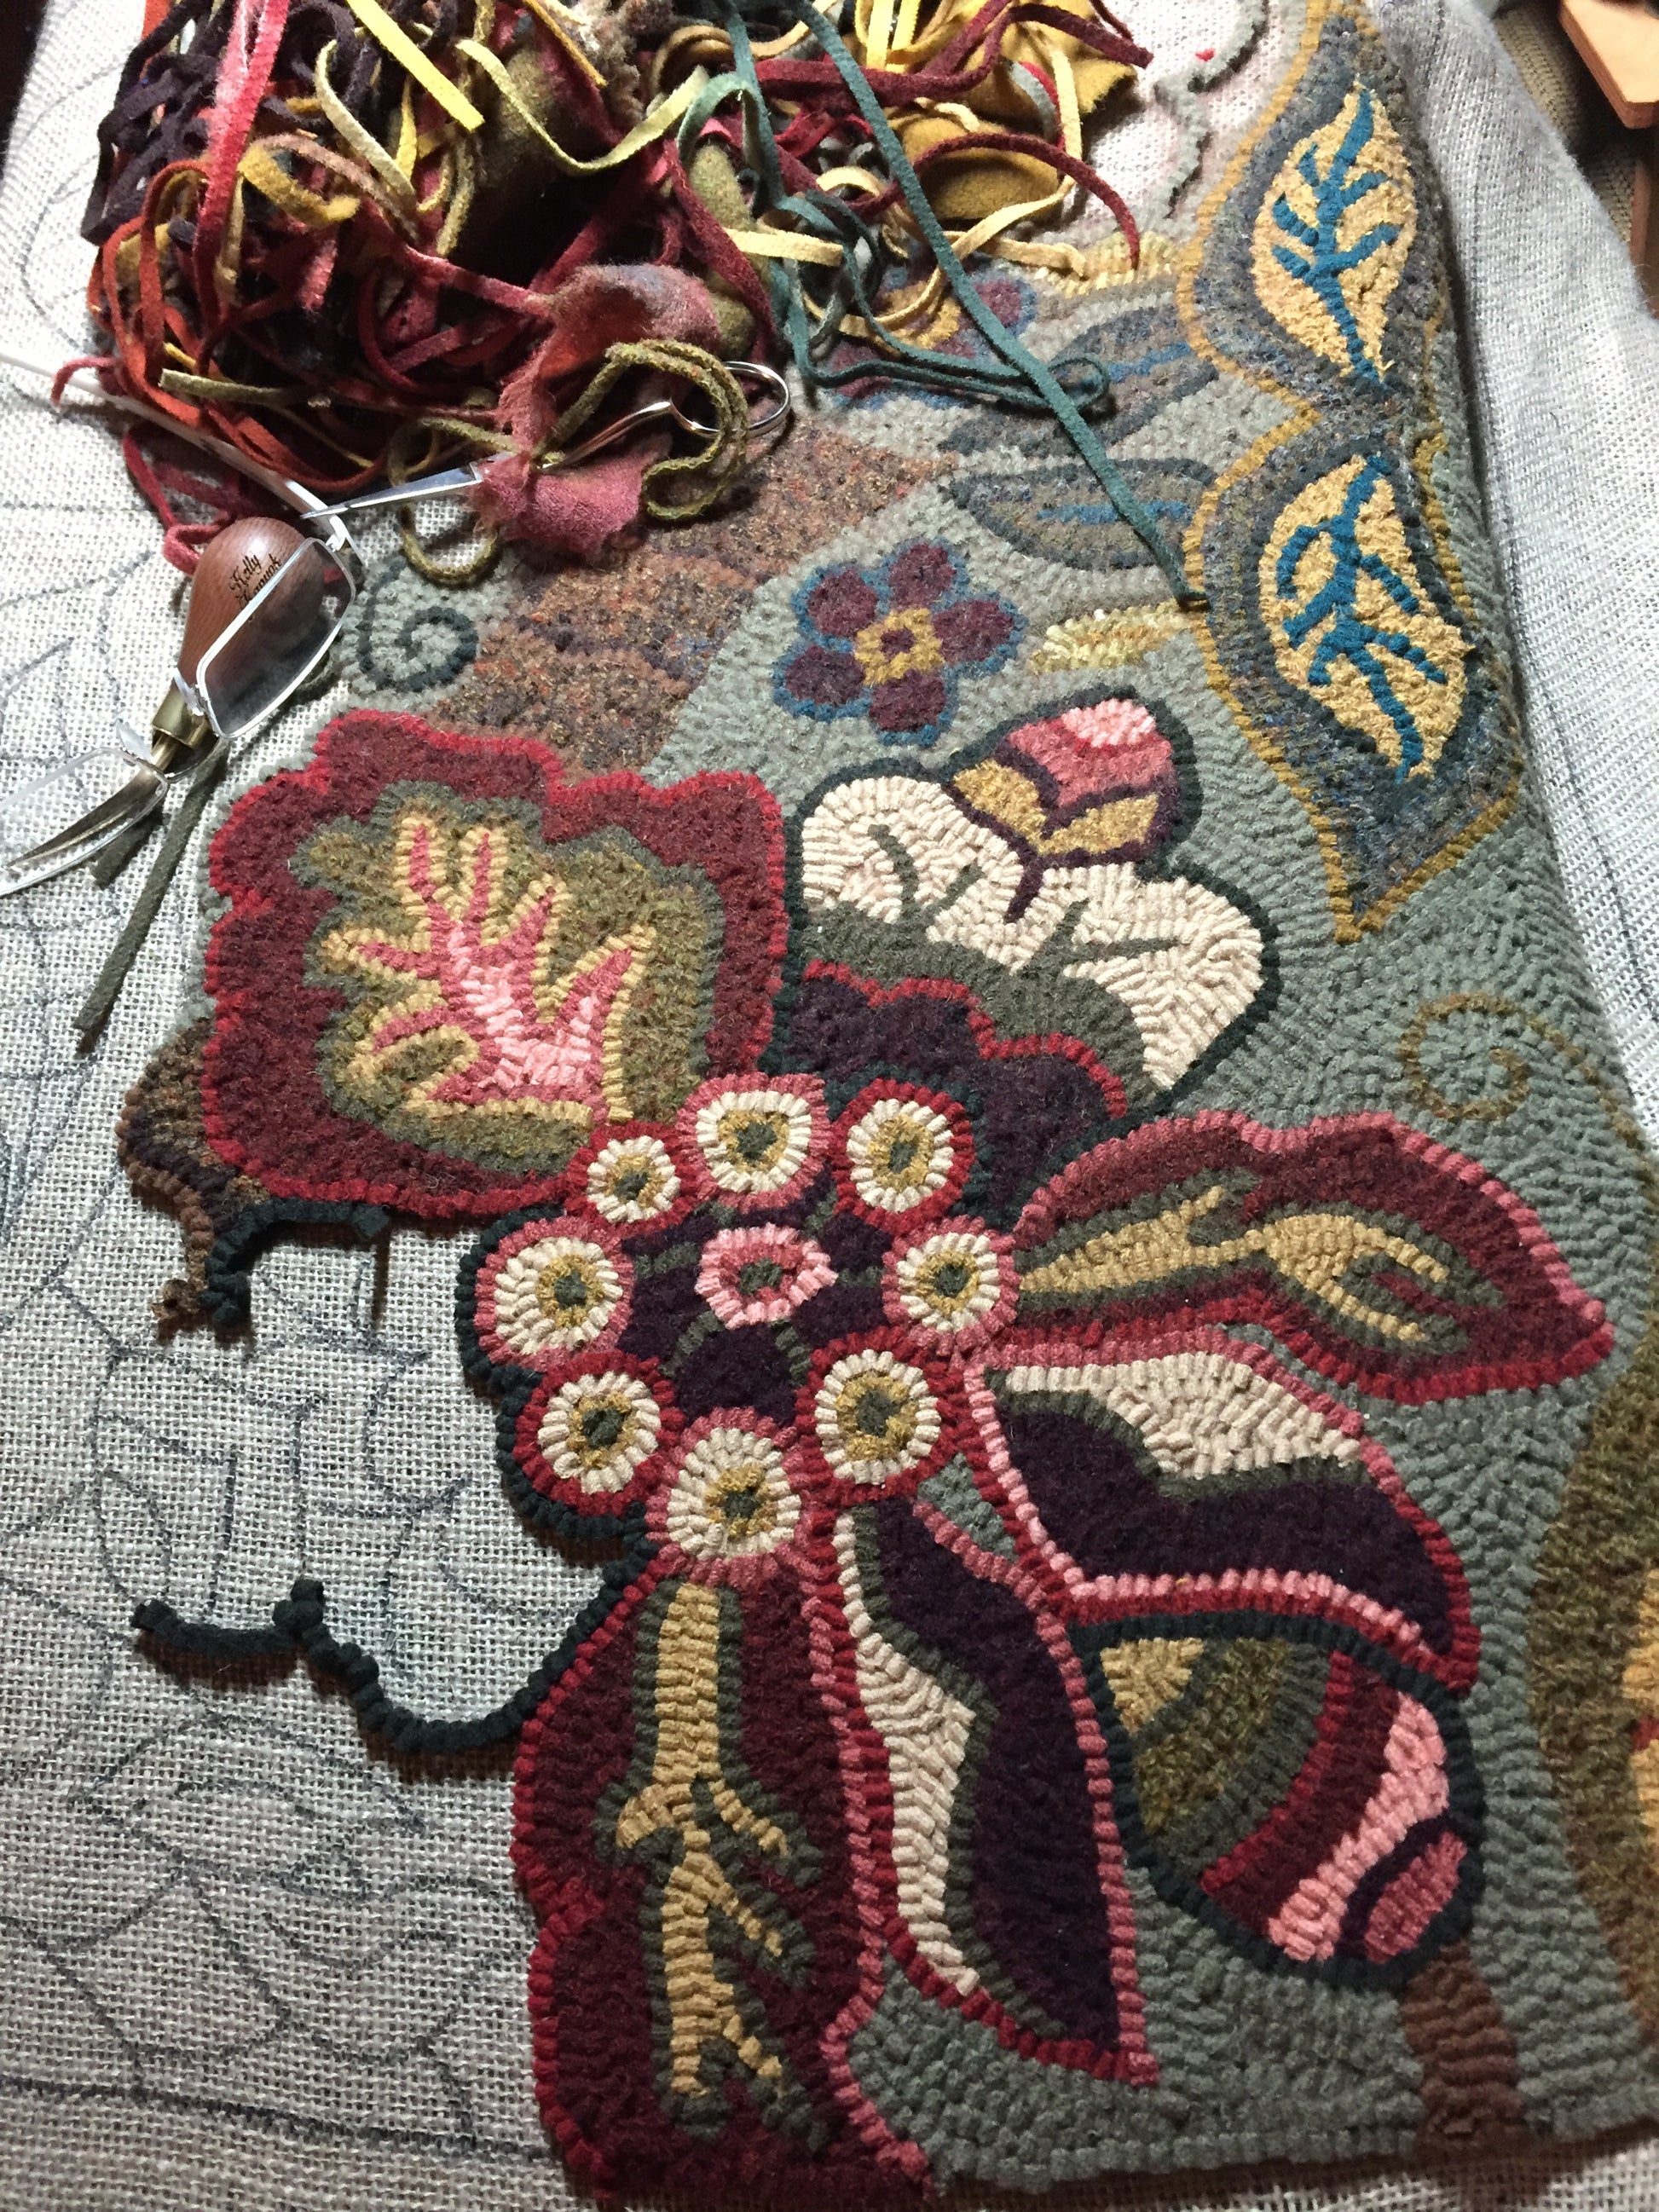 Flourish 3060- Rug Hooking pattern on Linen, Floral Design by Orphaned Wool. Work in process